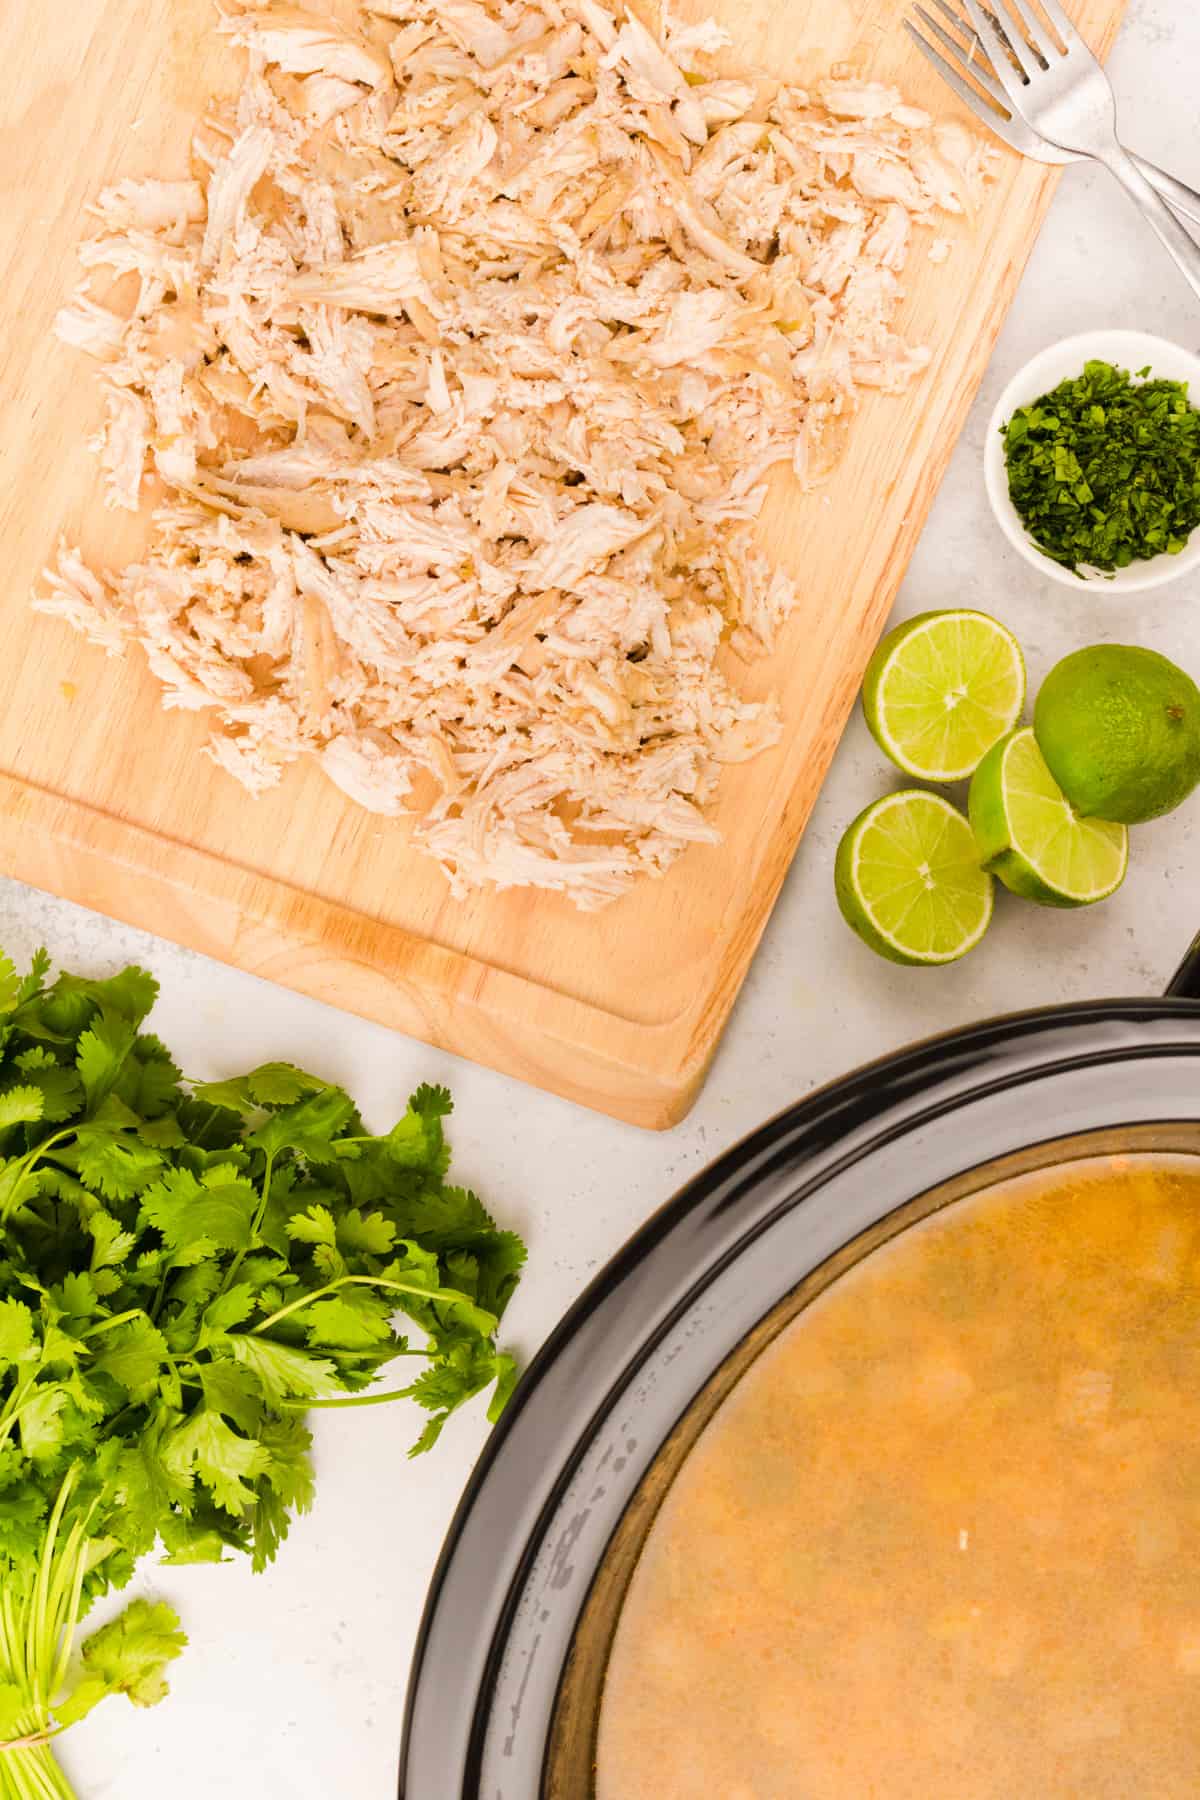 Shredded chicken on a wooden cutting board next to a crockpot wit other ingredients for white chicken chili.